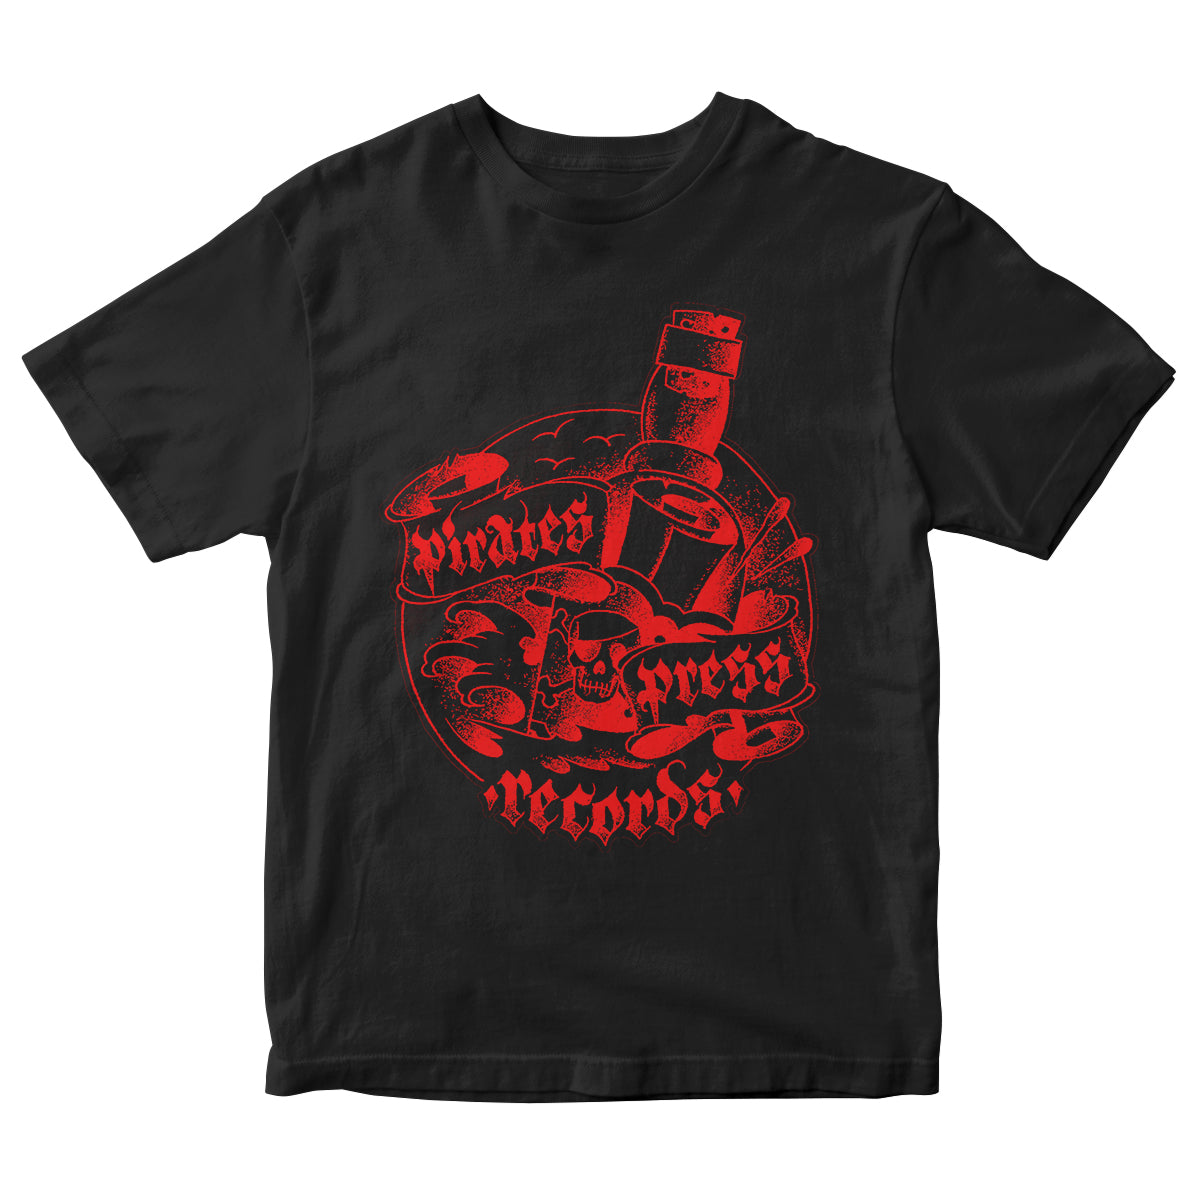 Pirates Press Records - Bottle - Red on Black - T-Shirt